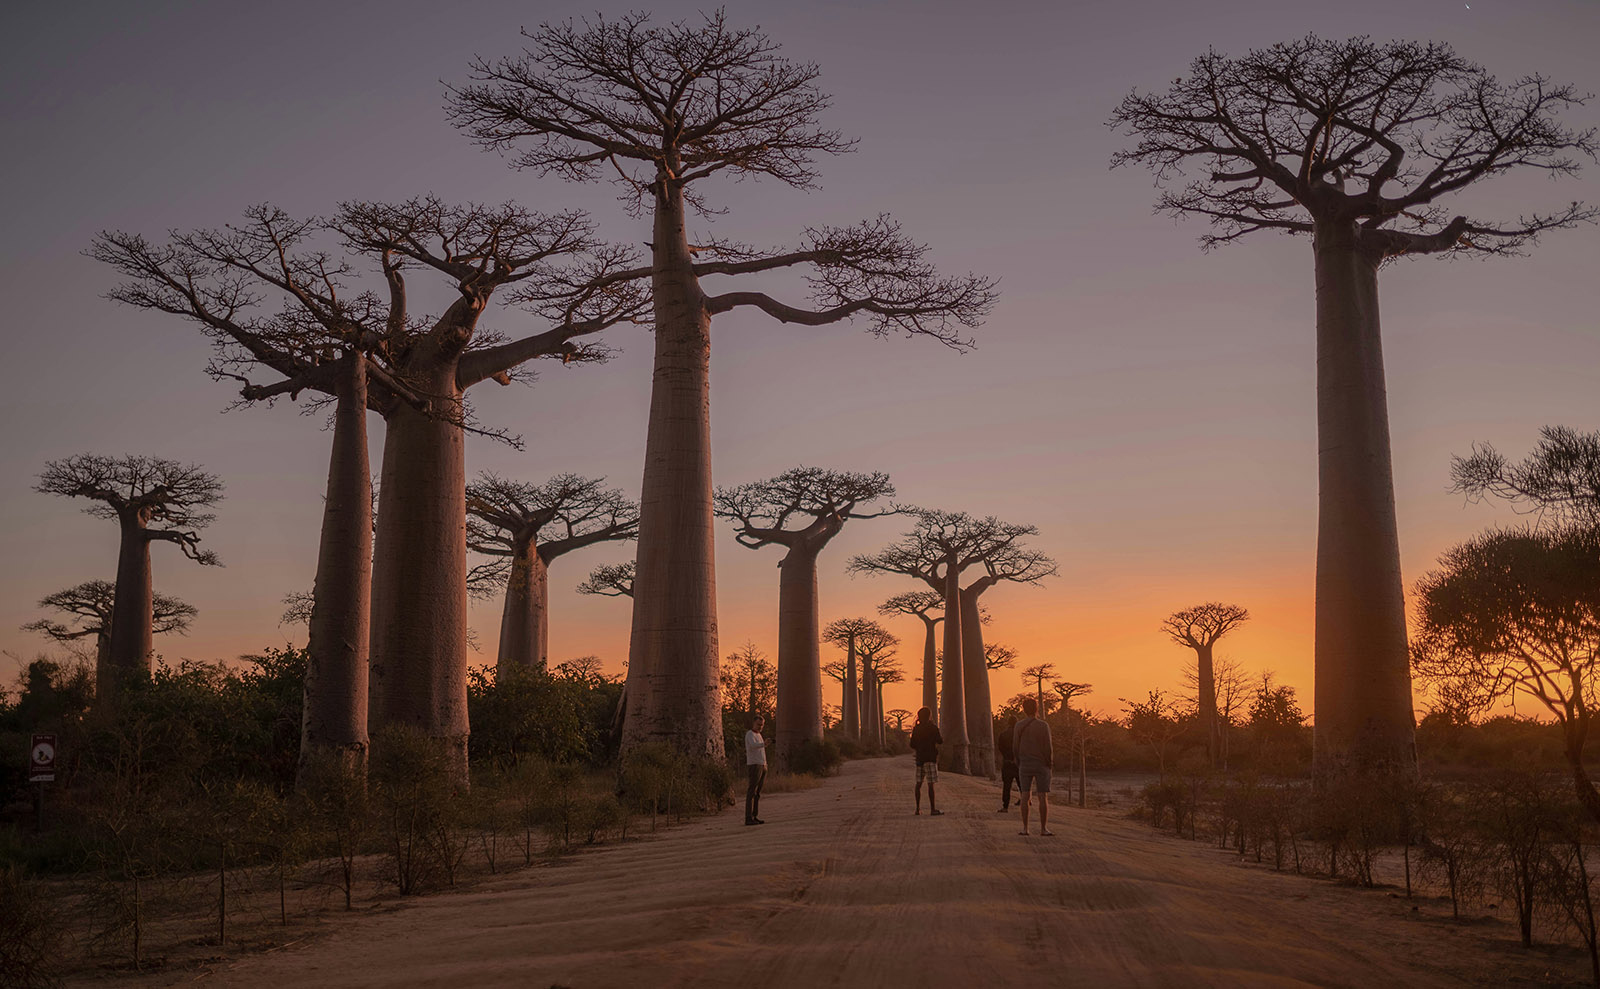 Baobab Trees, The Shire, Narwhals, Best Bookmarks, Coraline Musical & More: Endnotes 07 June